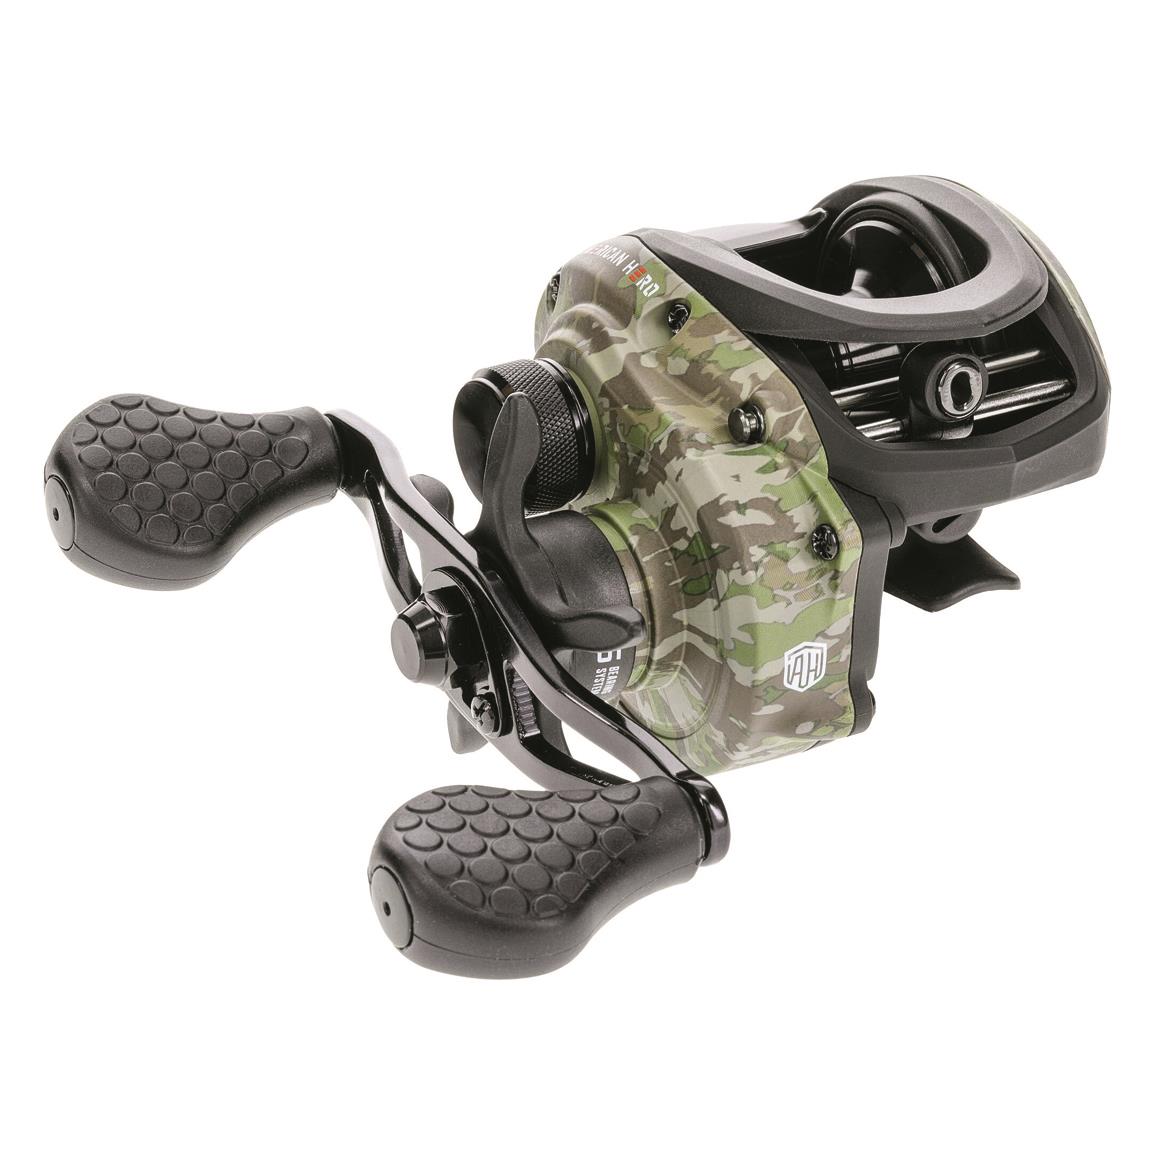 Abu Garcia Revo X Cast Combo 7ft 10-30g MH Rod and Reel Camo Green 1511764  for sale online